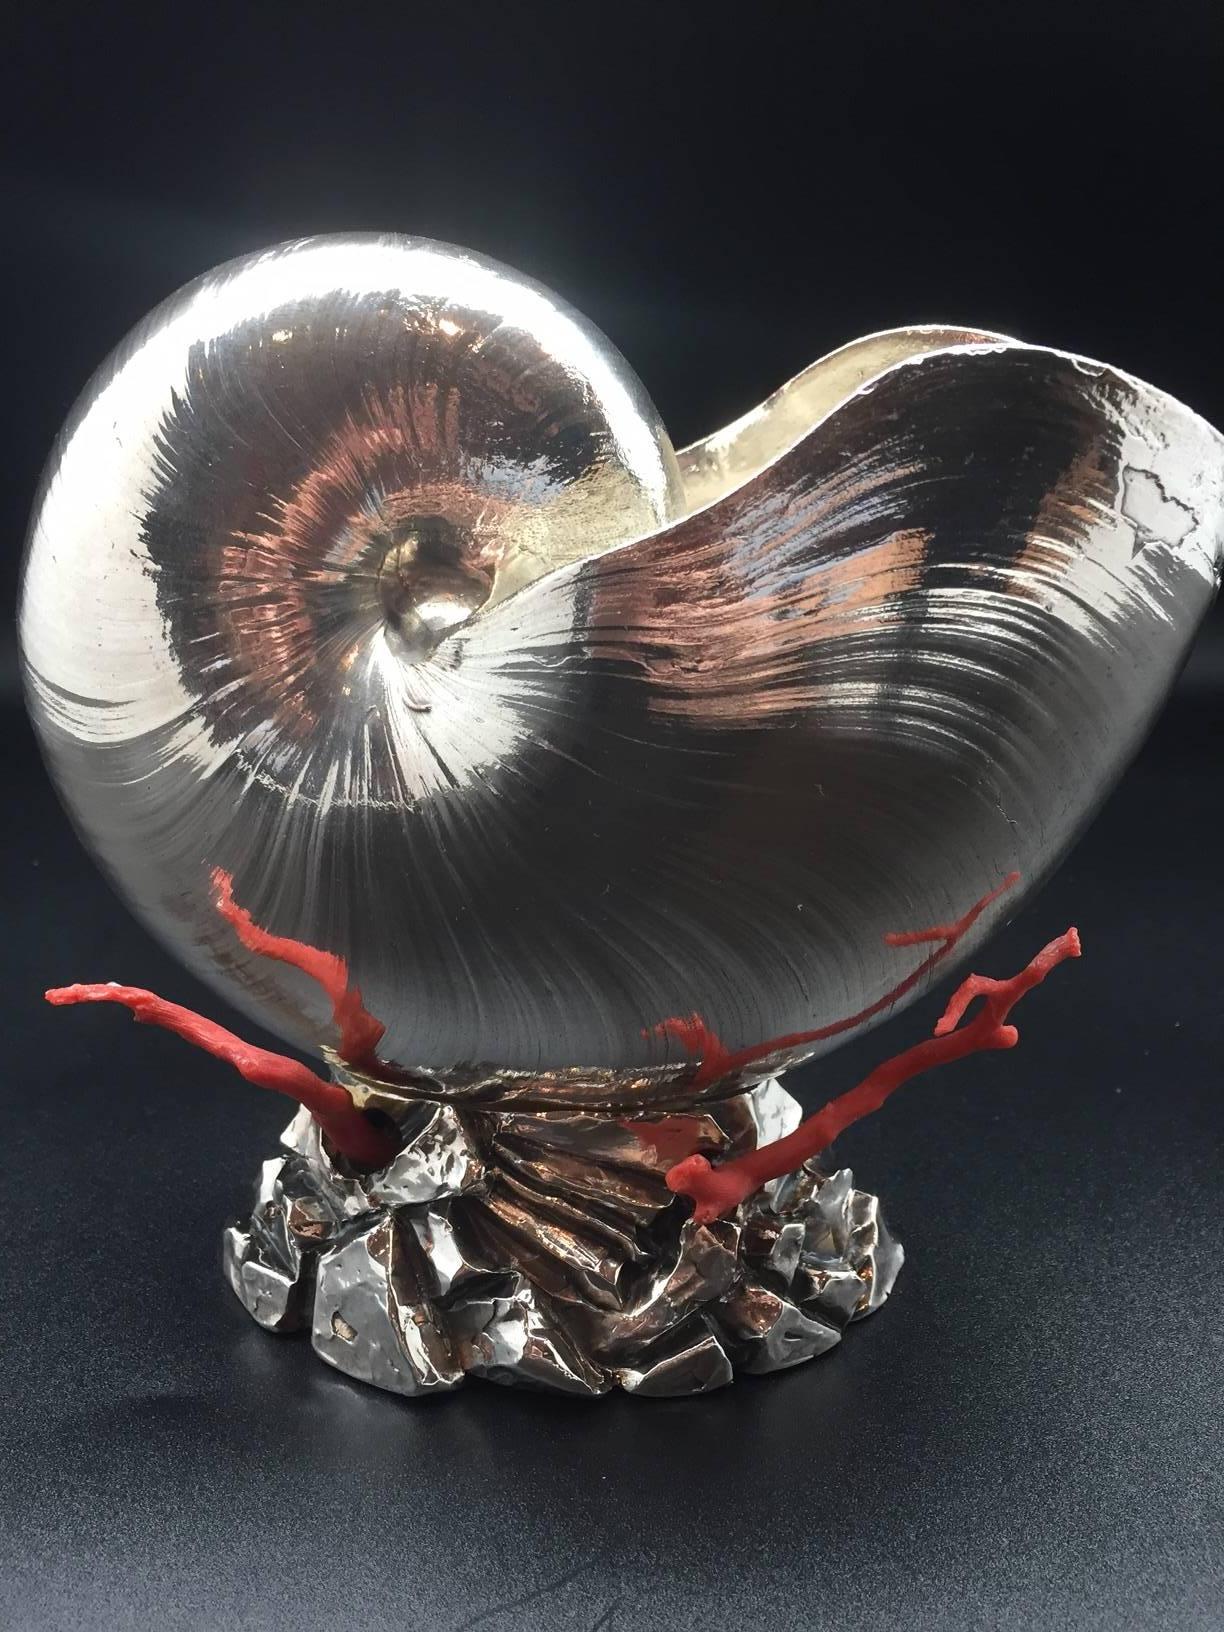 Italian 925 silver coated nautilus shell on a naturalistic base with four red Mediterranean coral branches. The silvering was done in Rome Italy, and has the R&G Italy hallmark, which was initially used when the company was known as Ruzzetti and